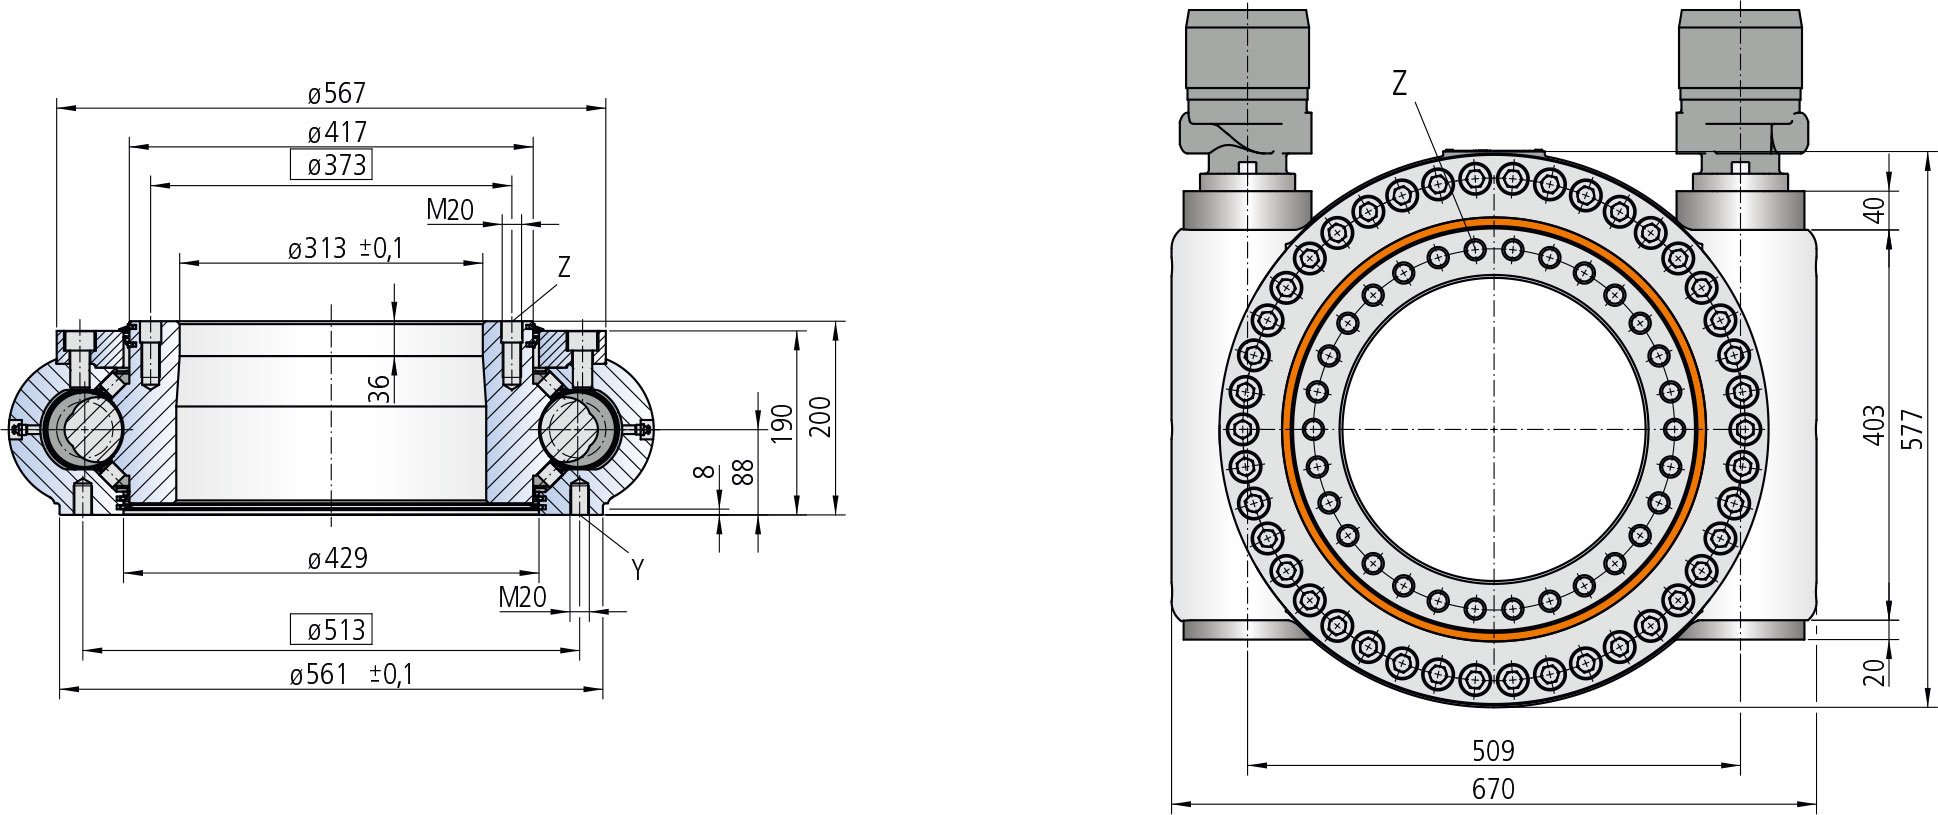 WD-H 0373 / 2 drive WD-H Series cad drawing